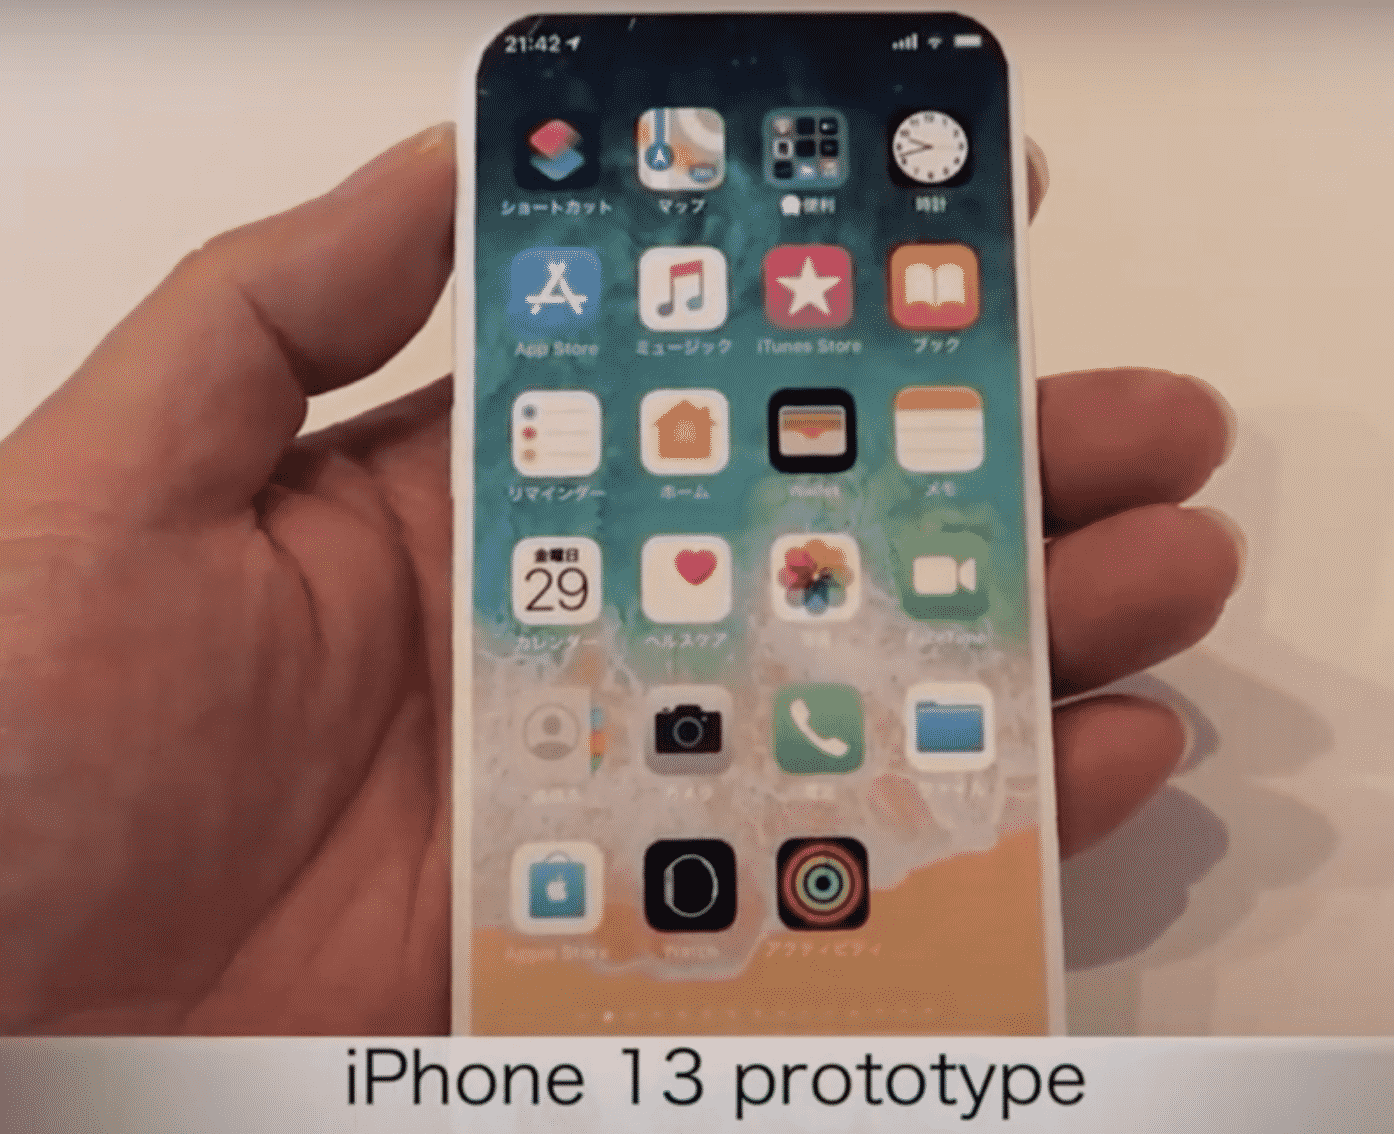 Apple iPhone 13 prototype images surface online